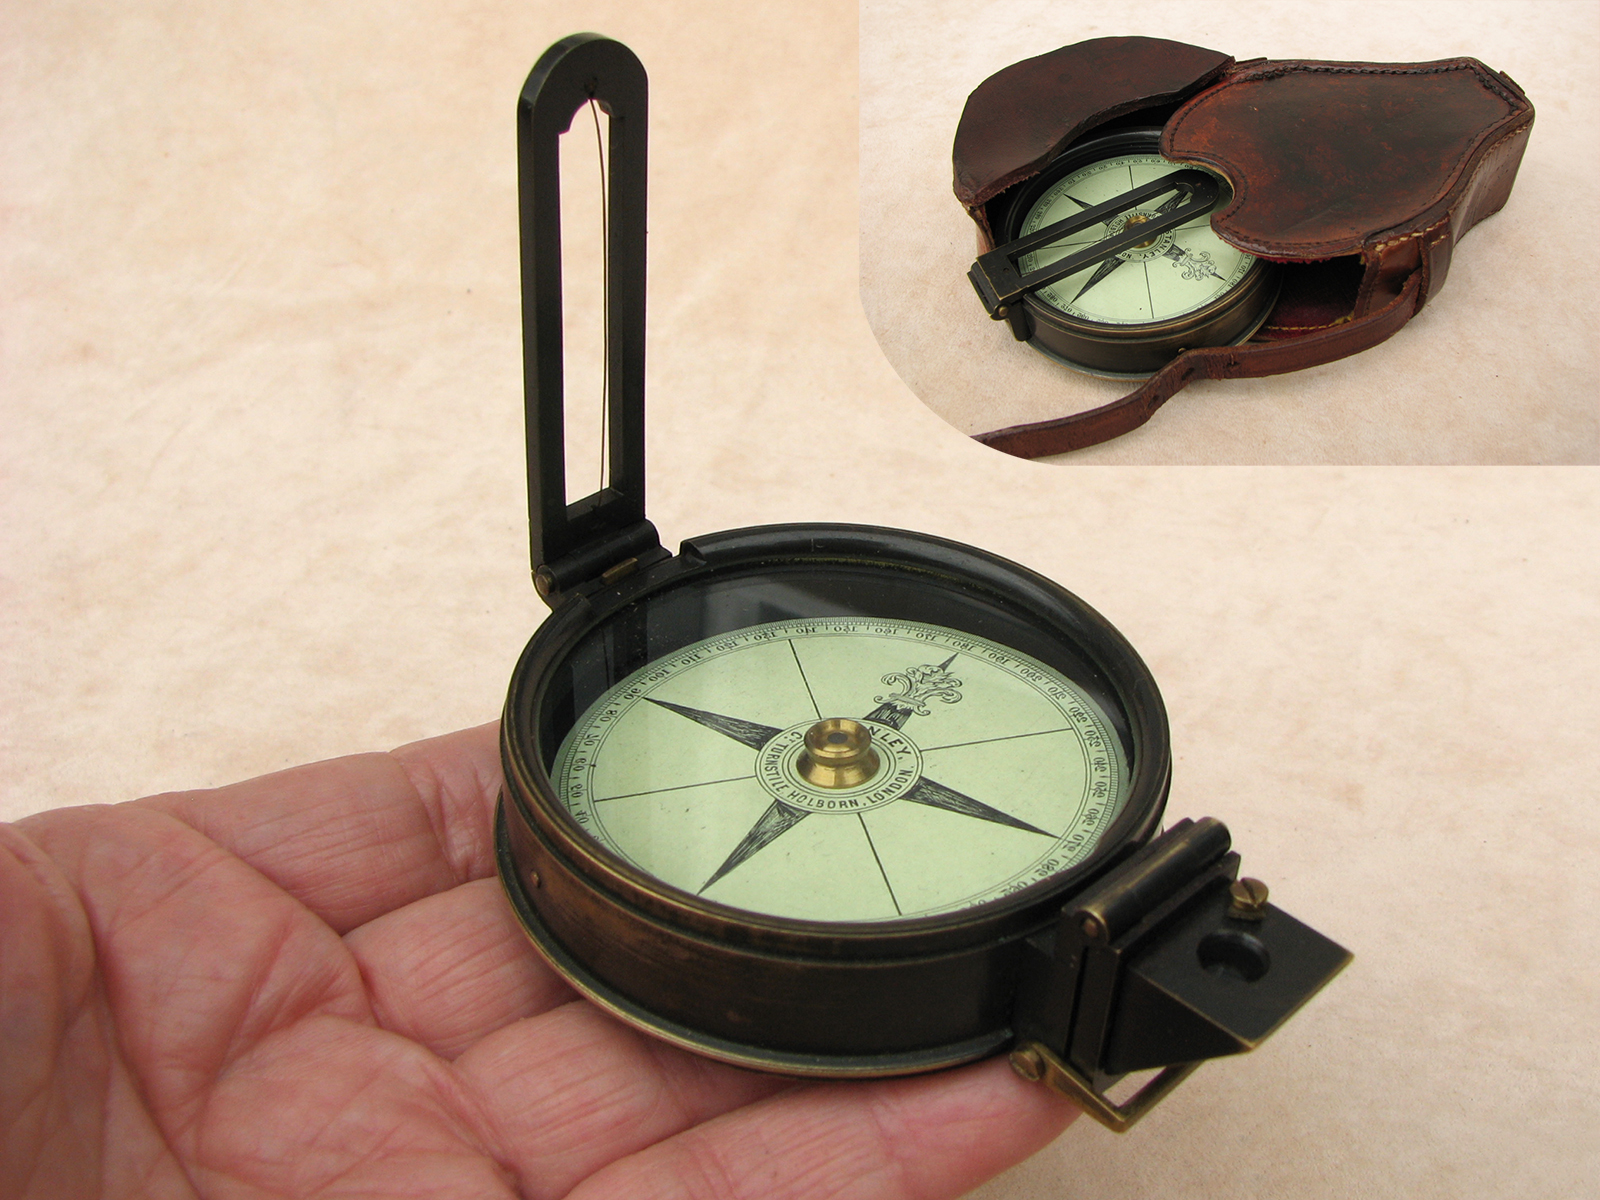 Late 19th century prismatic sighting compass in case by Stanley, London